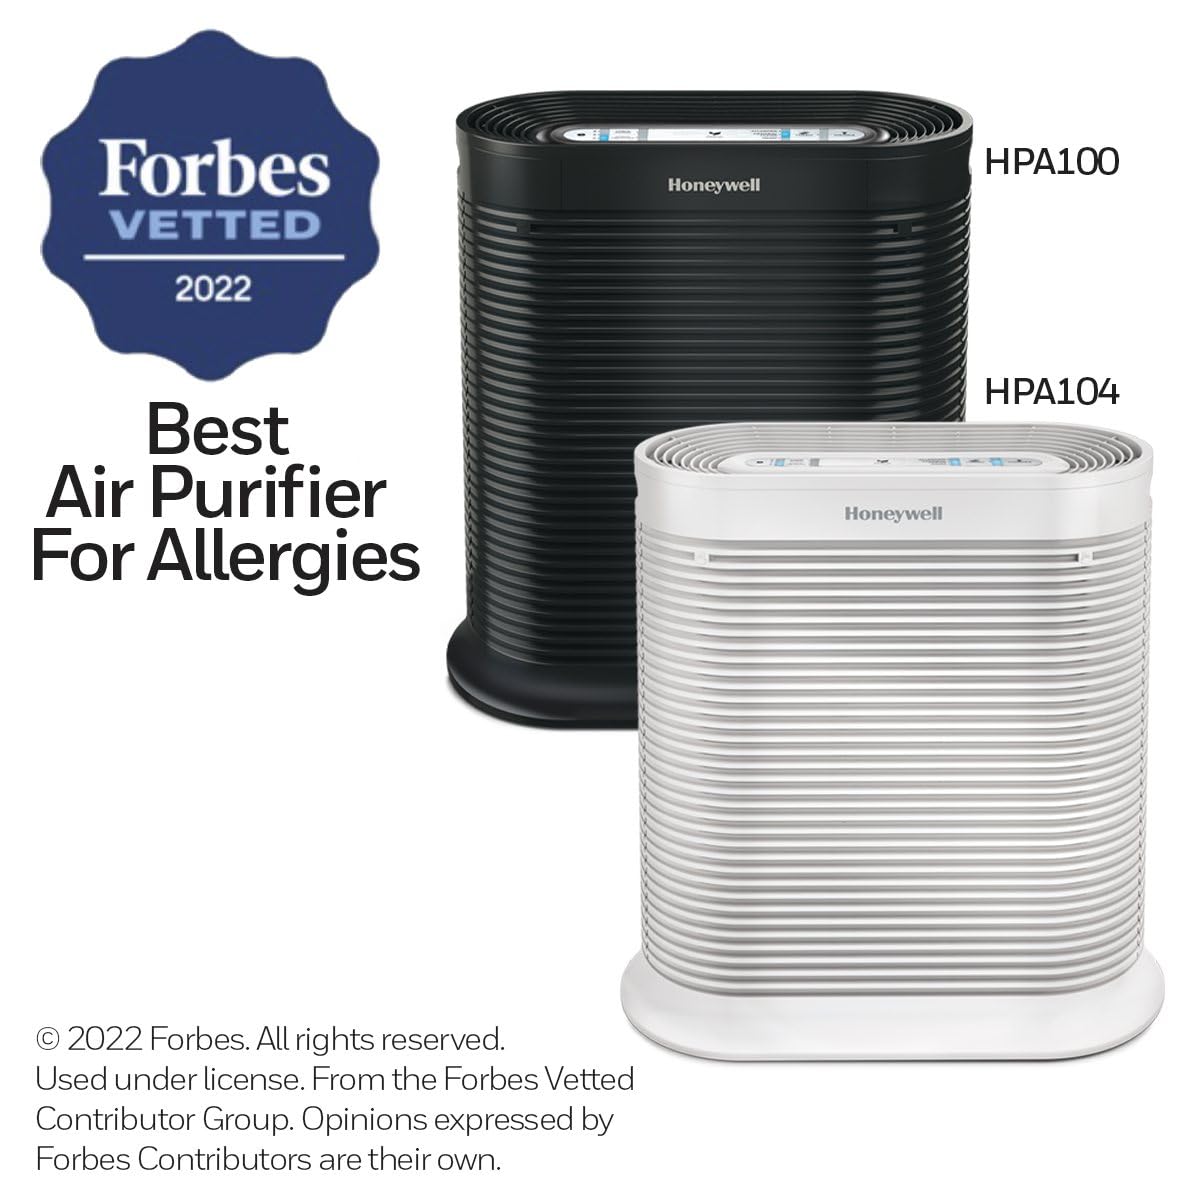 Honeywell HPA100 HEPA Air Purifier for Medium Rooms - Microscopic Airborne Allergen+ Reducer, Cleans Up To 750 Sq Ft in 1 Hour - Wildfire/Smoke, Pollen, Pet Dander, and Dust Air Purifier – Black